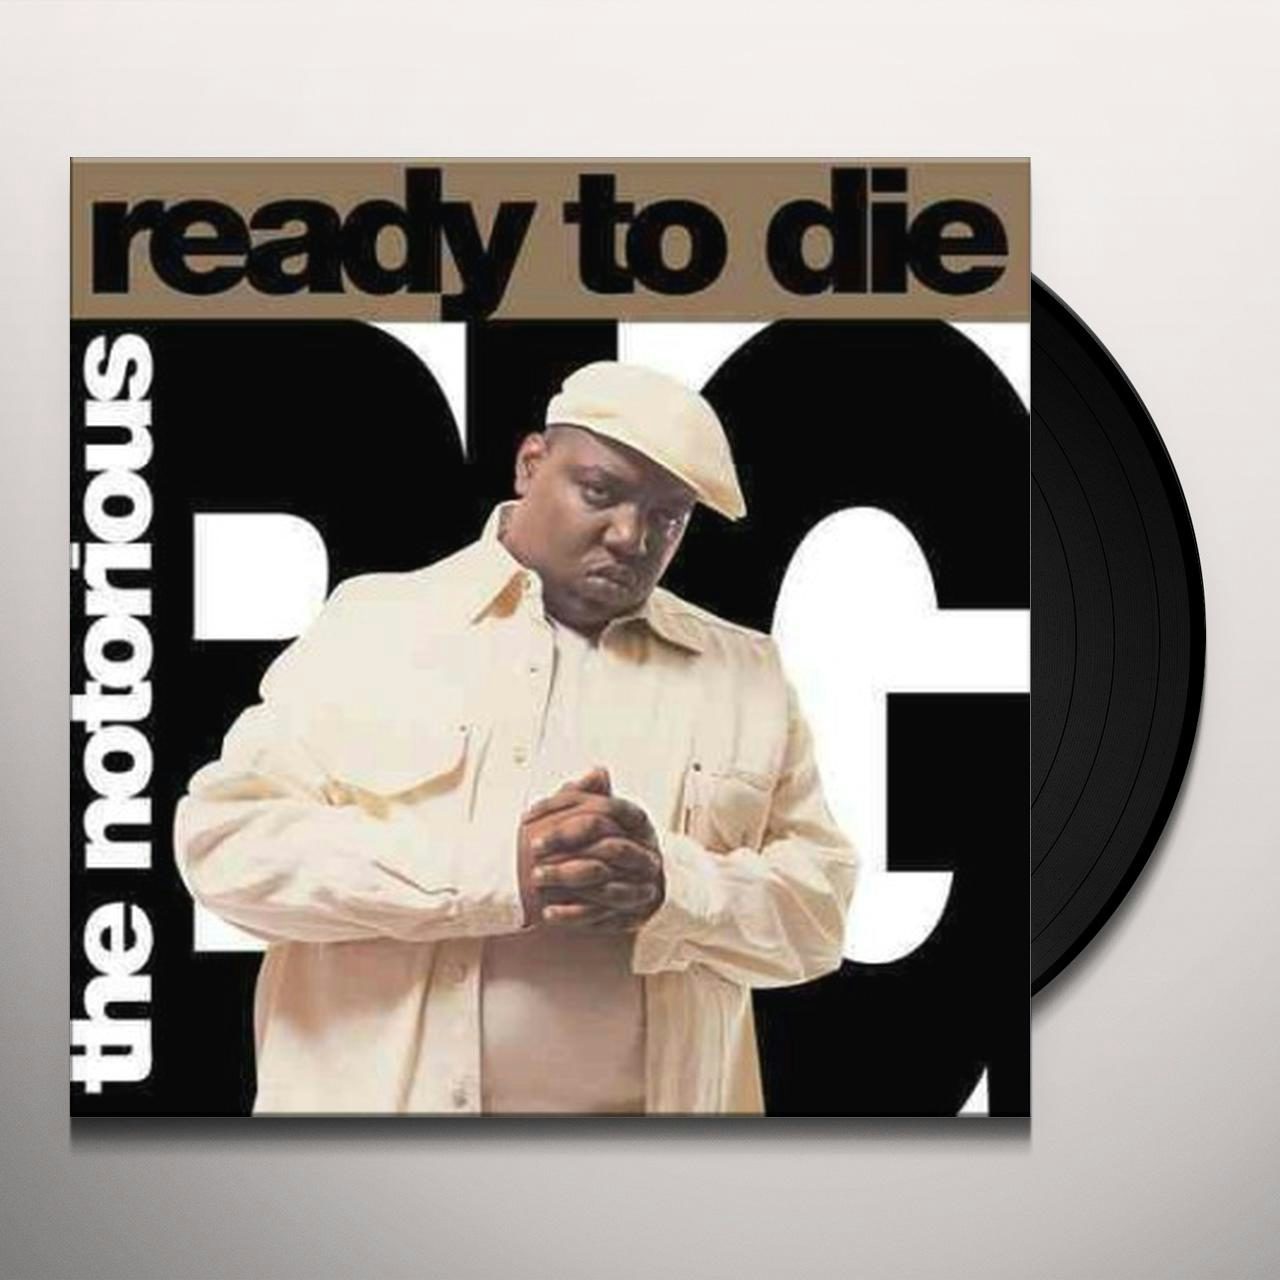 the notorious big ready to die album cover